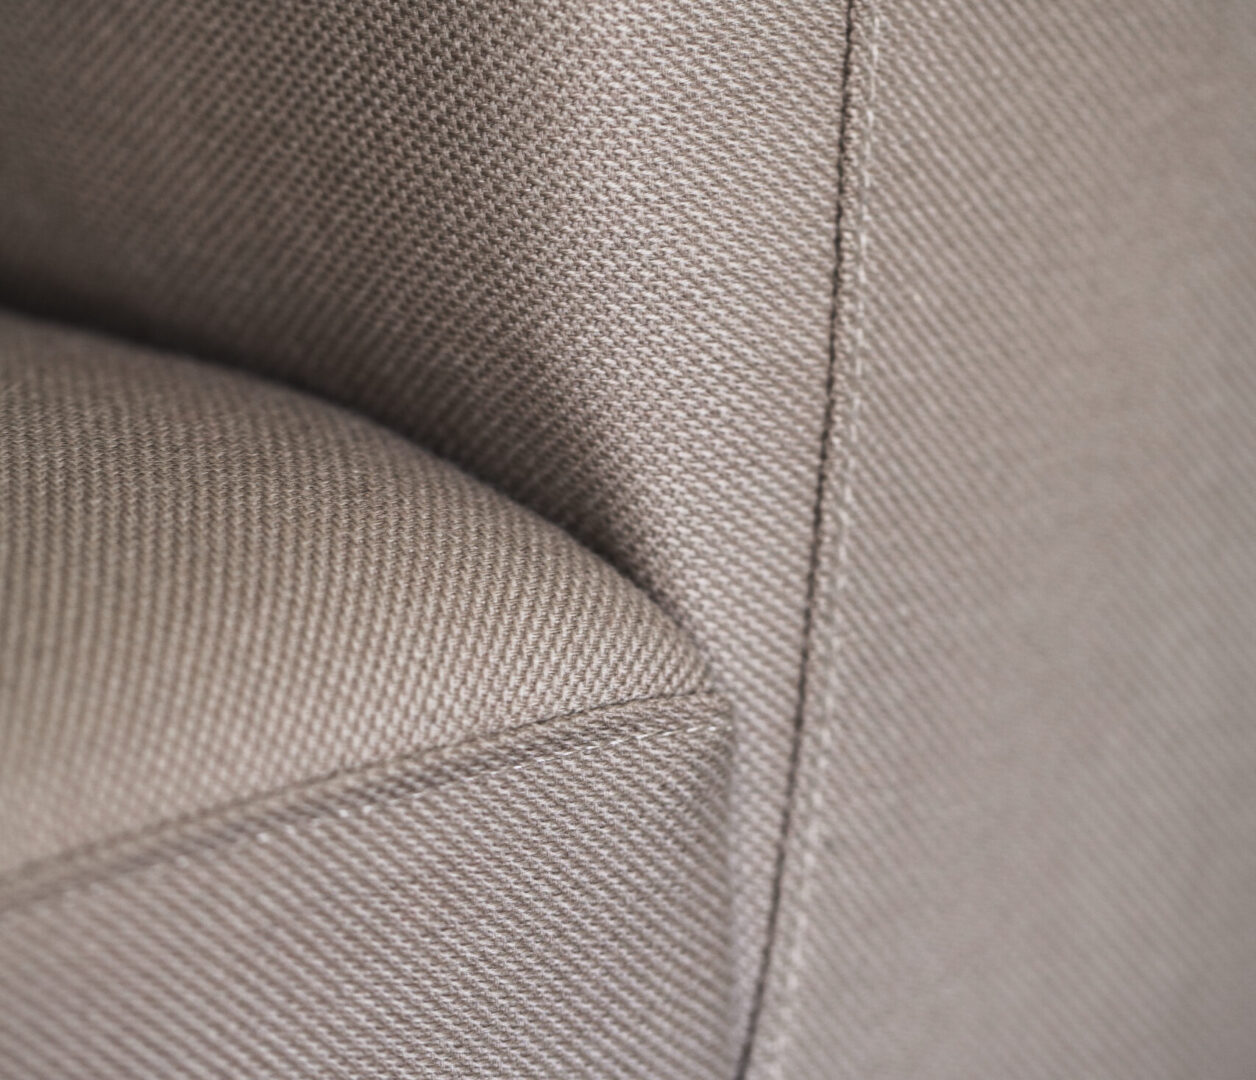 OCEE&FOUR – Soft Seating – FourLikes Sofa – Details Image 1